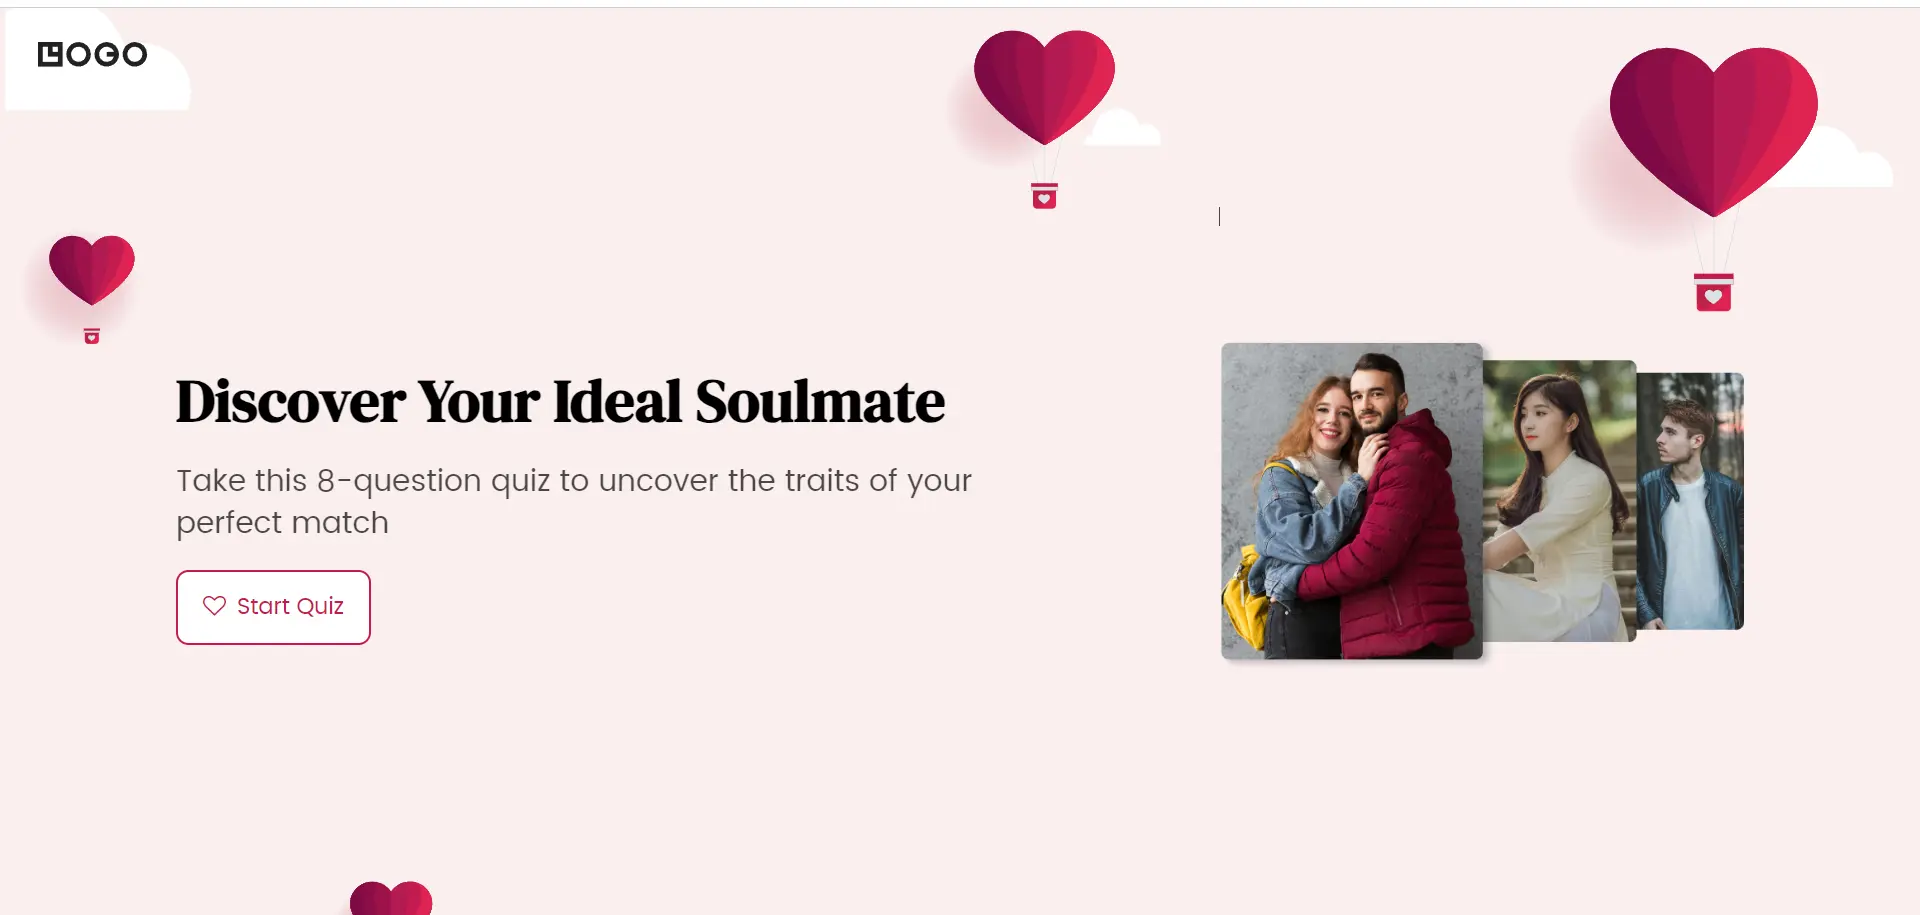 Discover Your Ideal Soulmate